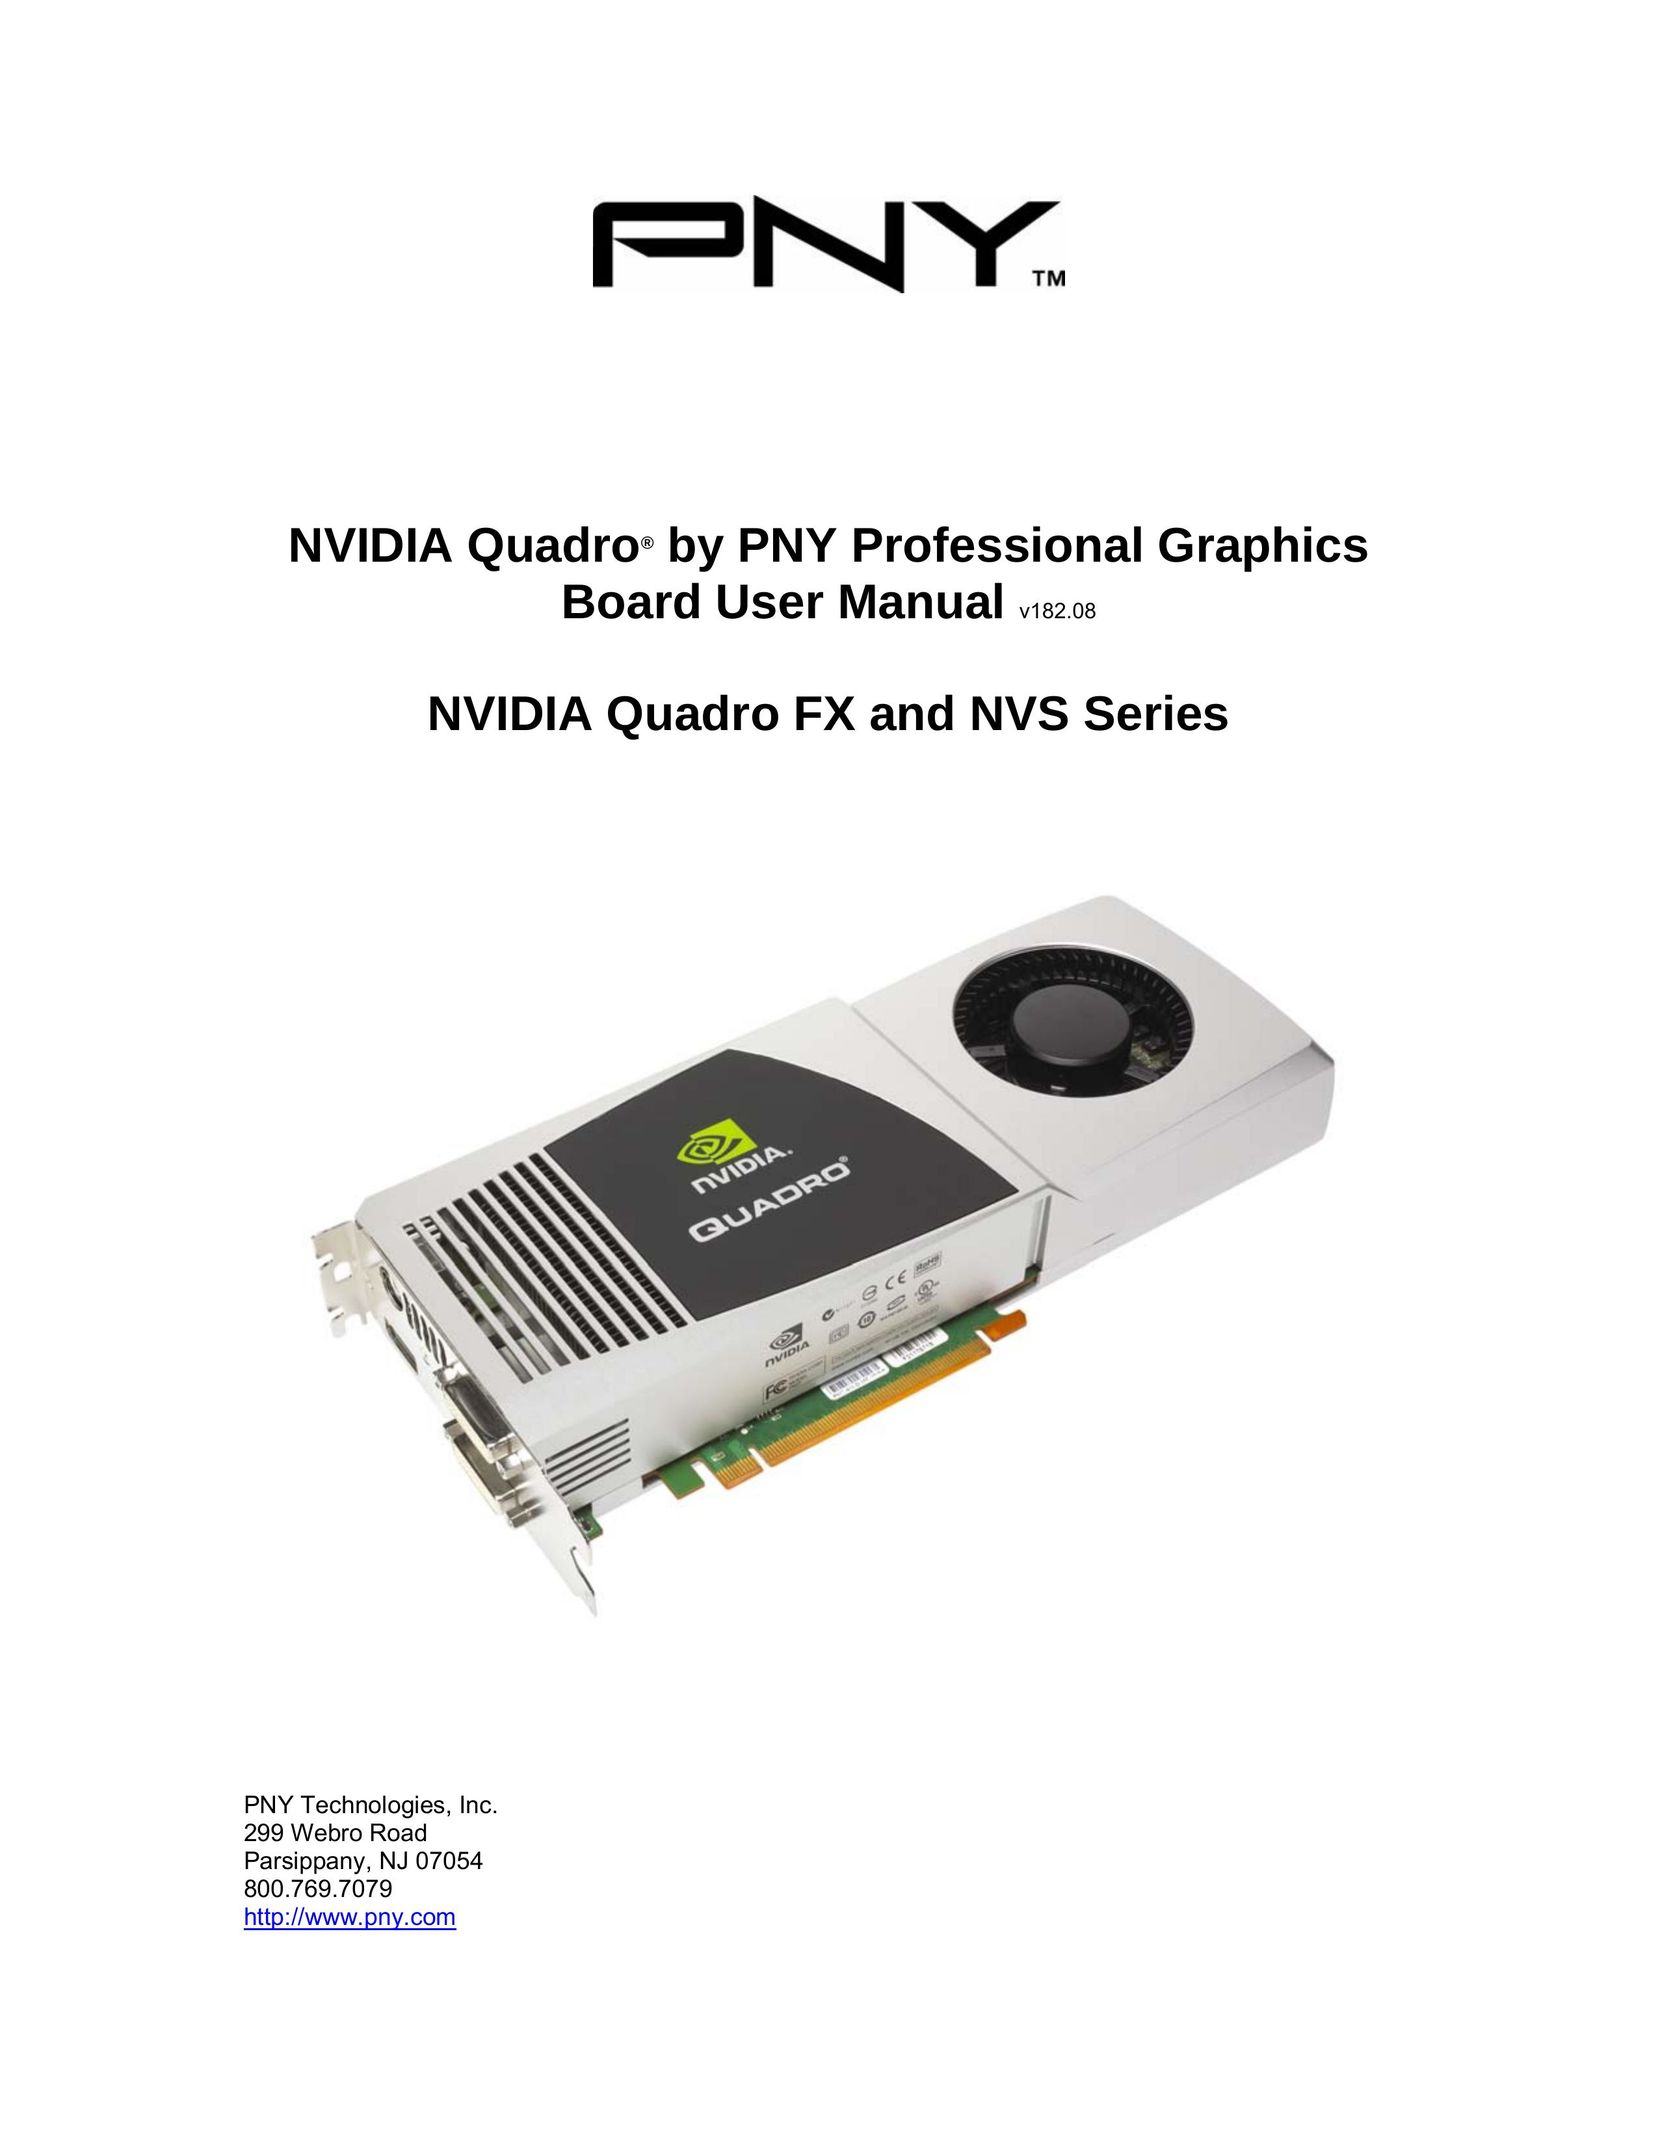 PNY FX 570 Computer Hardware User Manual